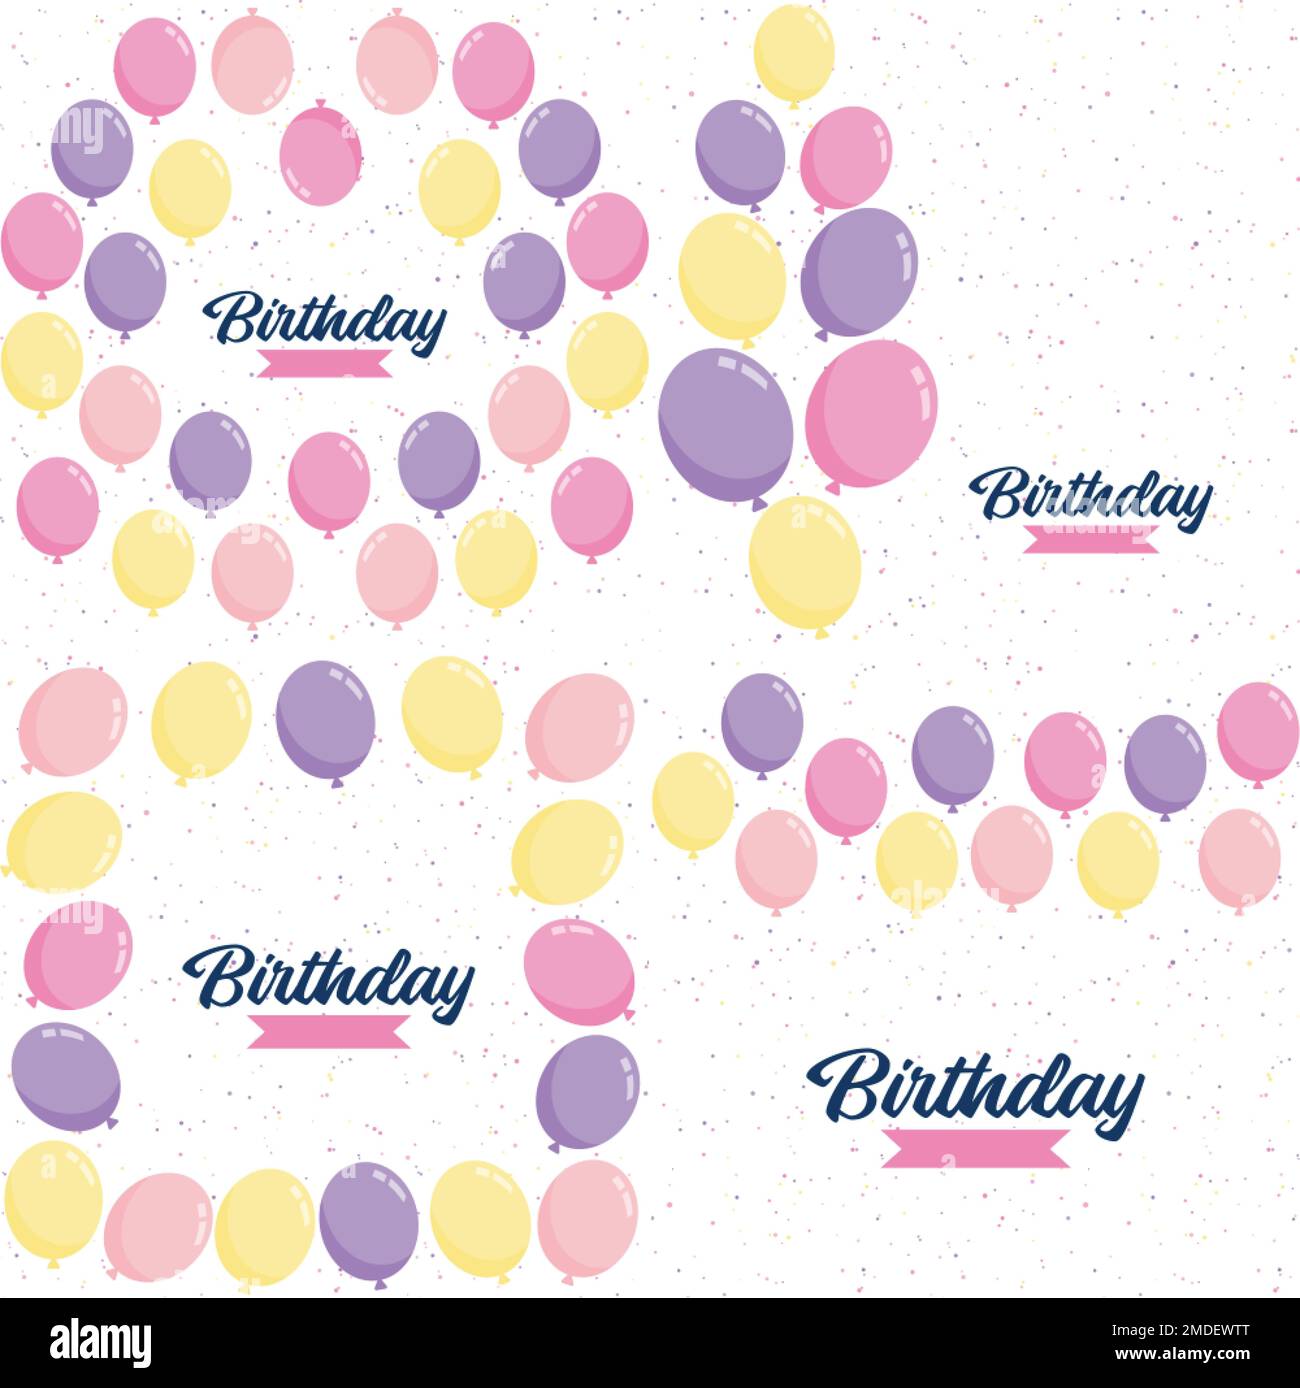 Vector illustration of aHappy Birthday celebration background with ...